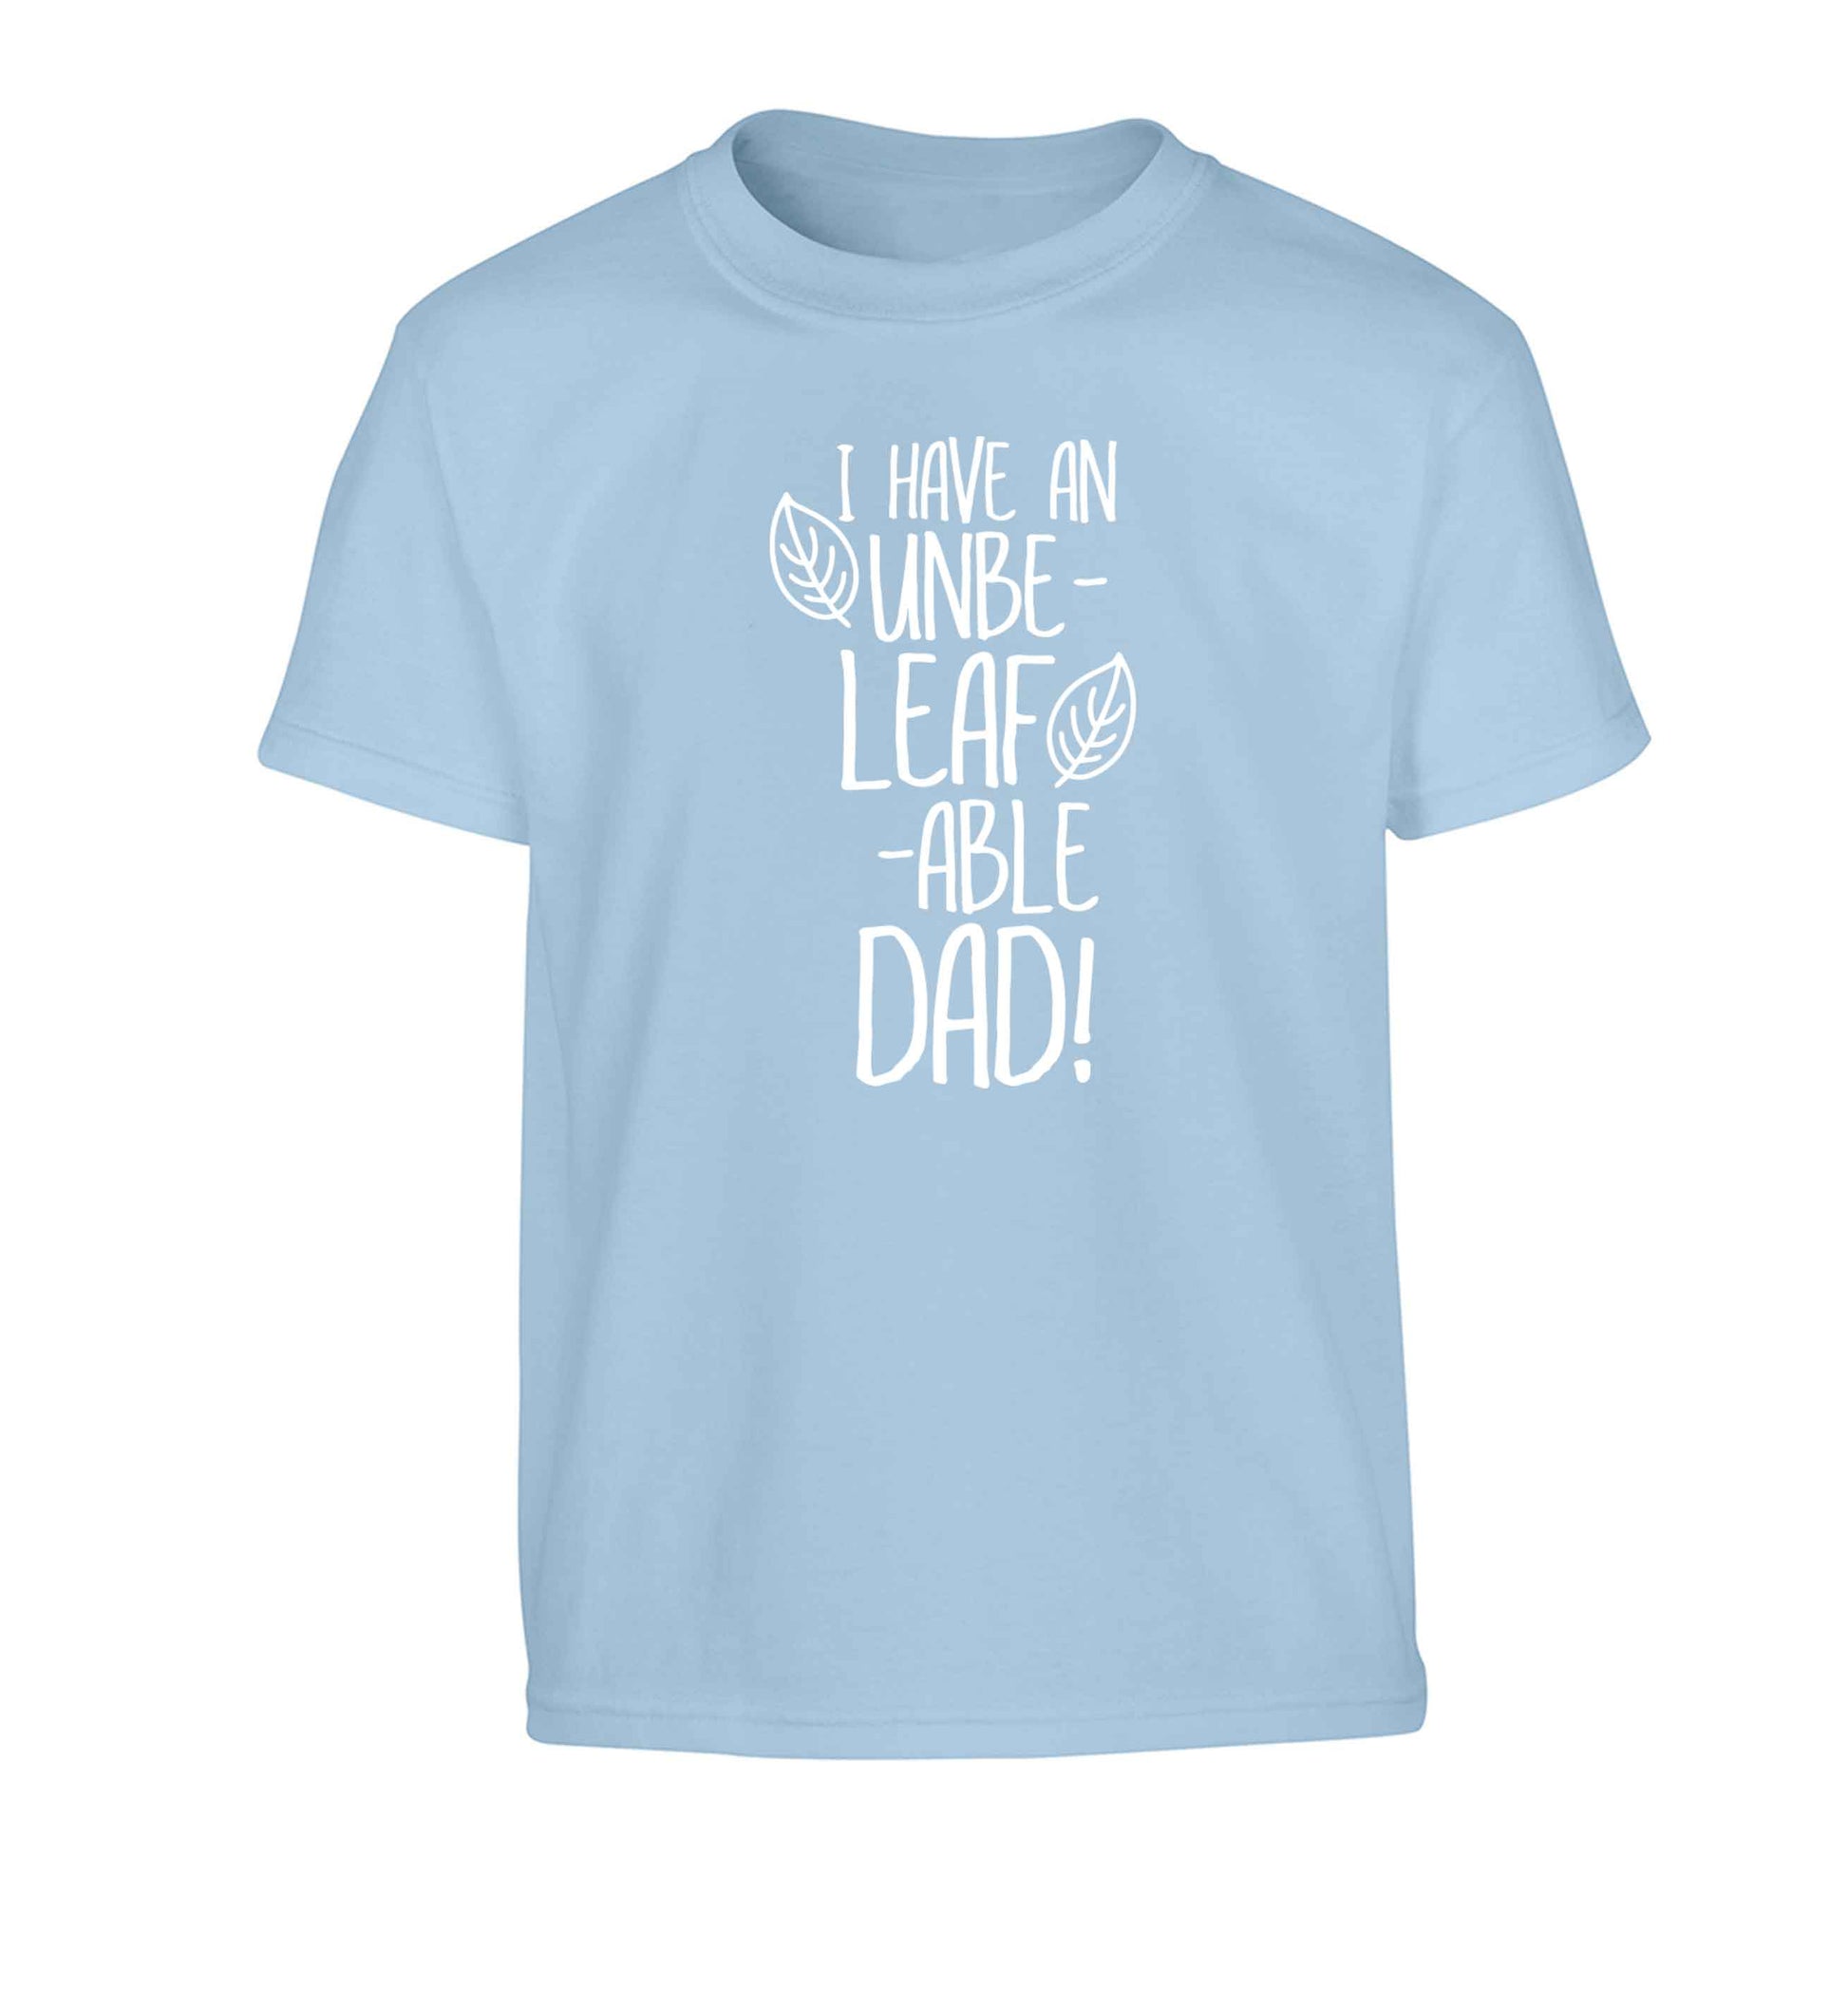 I have an unbe-leaf-able dad Children's light blue Tshirt 12-13 Years